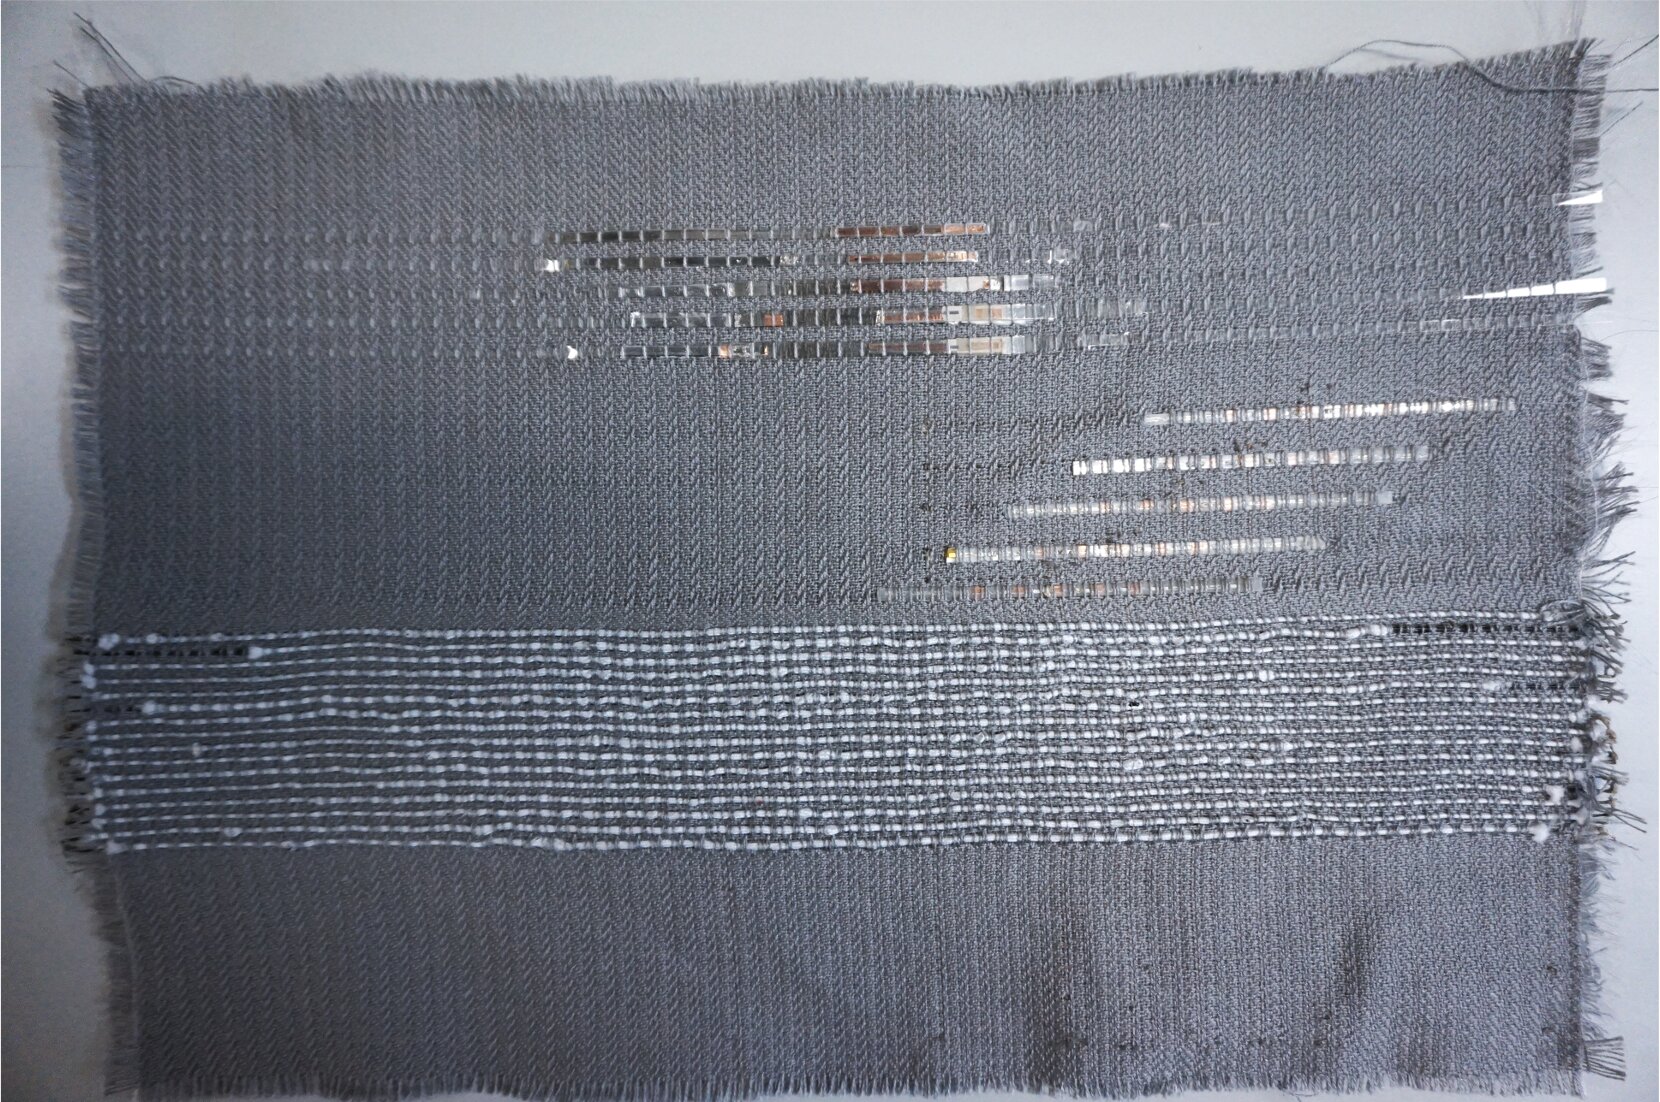 A cheaper method for making woven displays and smart fabrics of any size or shape